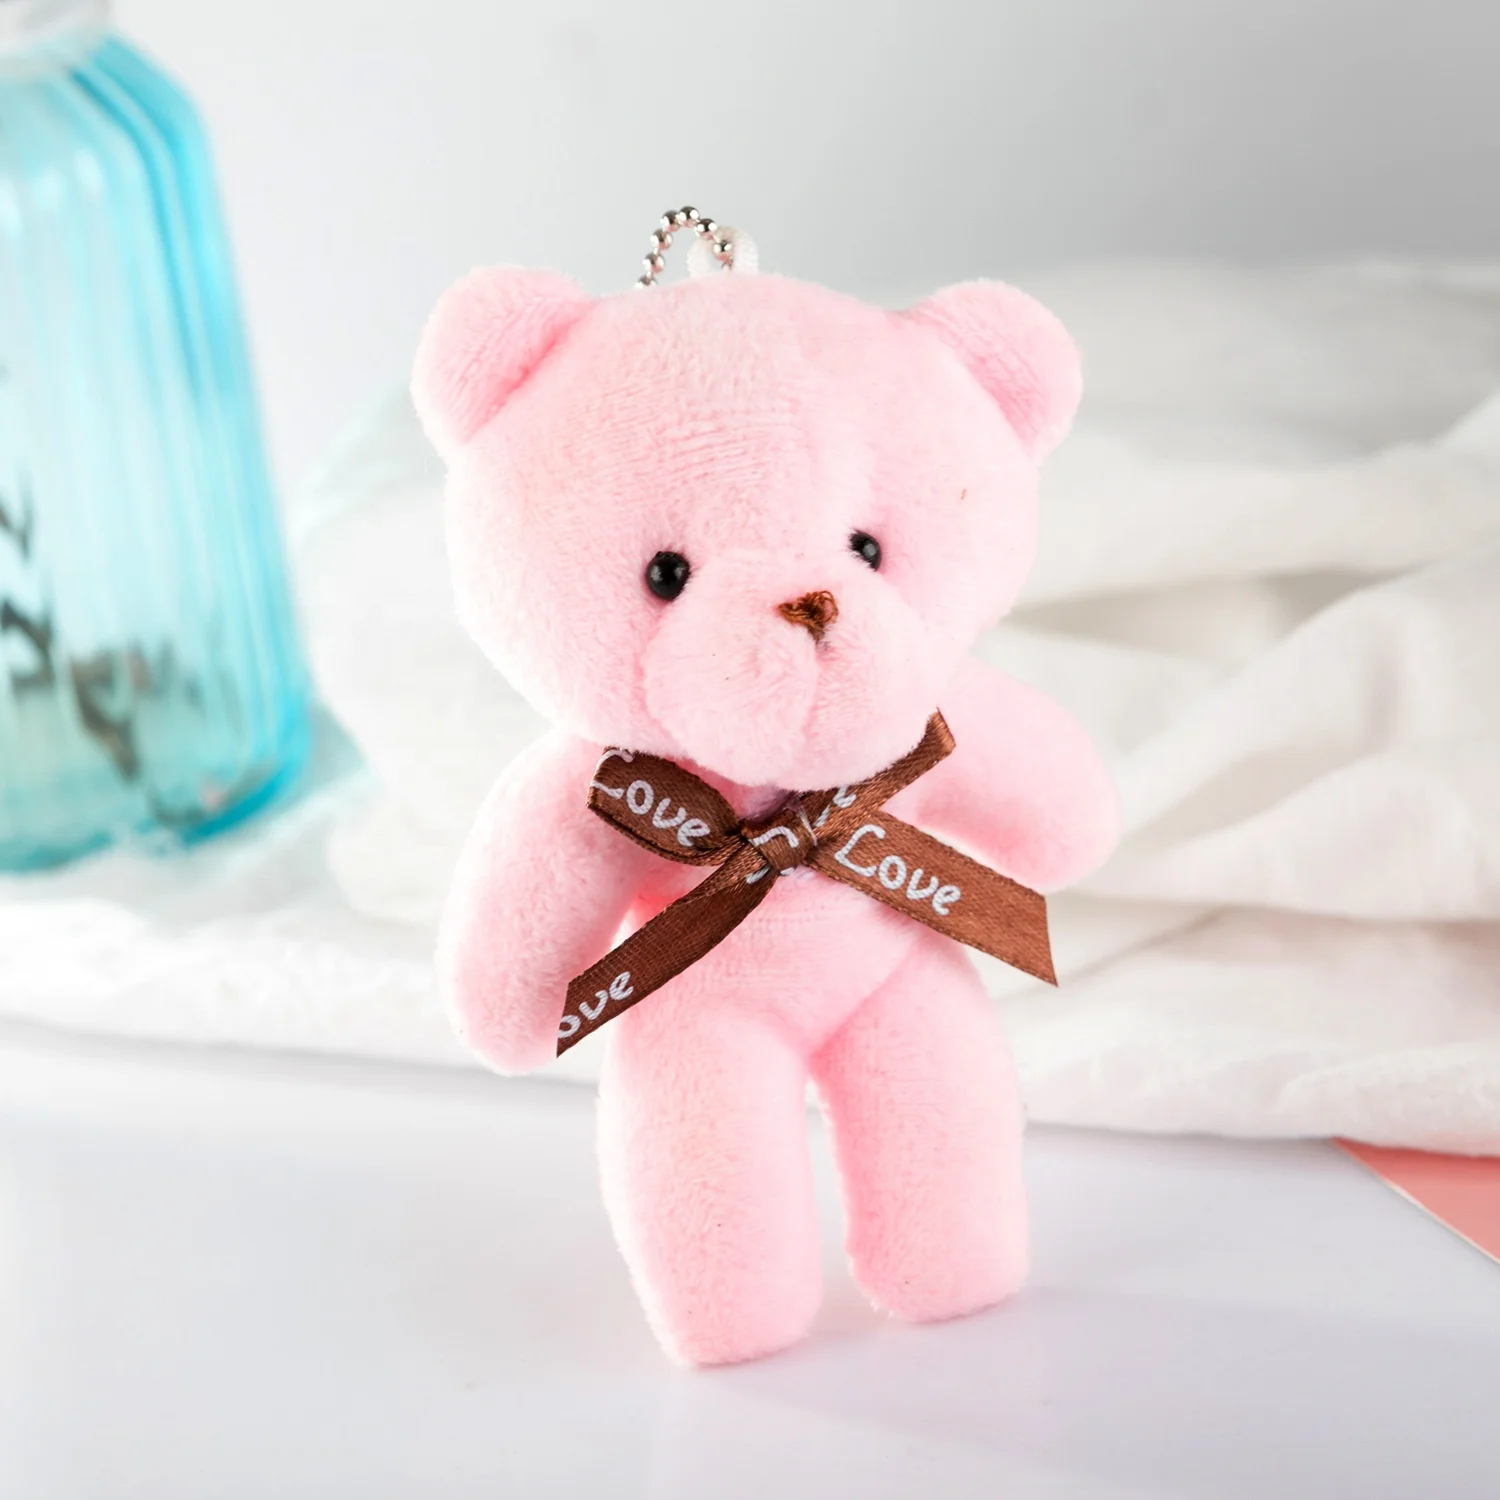 Wholesale of teddy bear plush toys, connected teddy bear dolls, teddy bear toys, small gift manufacturers